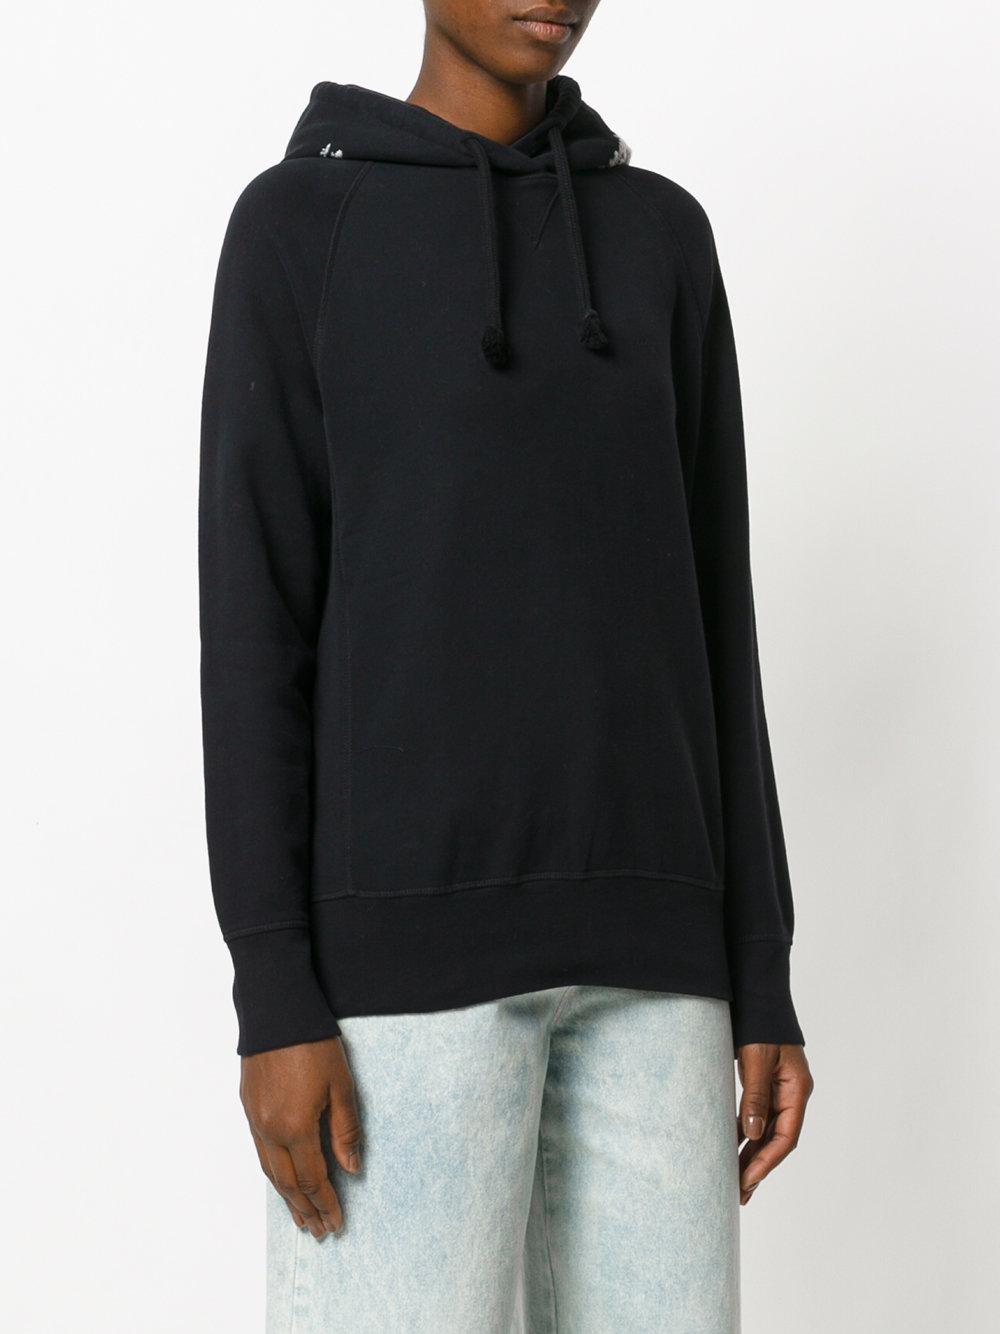 Lyst - Levi'S Embroidered Hoodie in Black